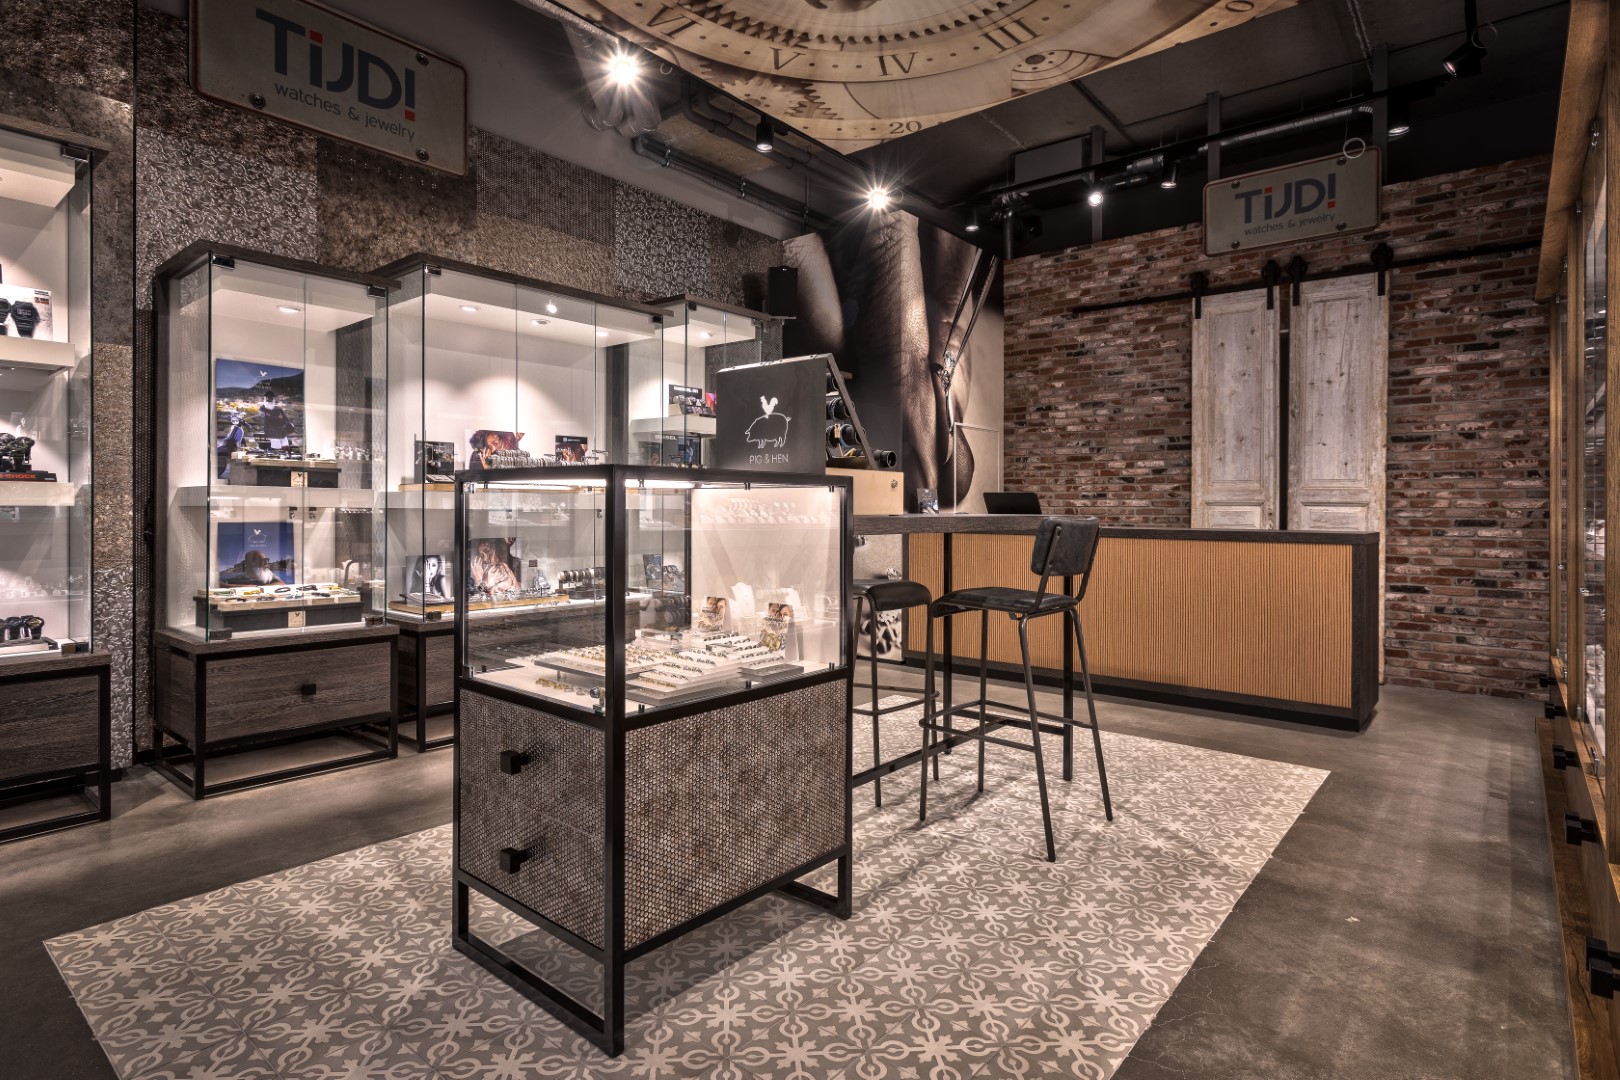 Shop design after renovation of the jewelry store van Tijd! Watches & Jewelry